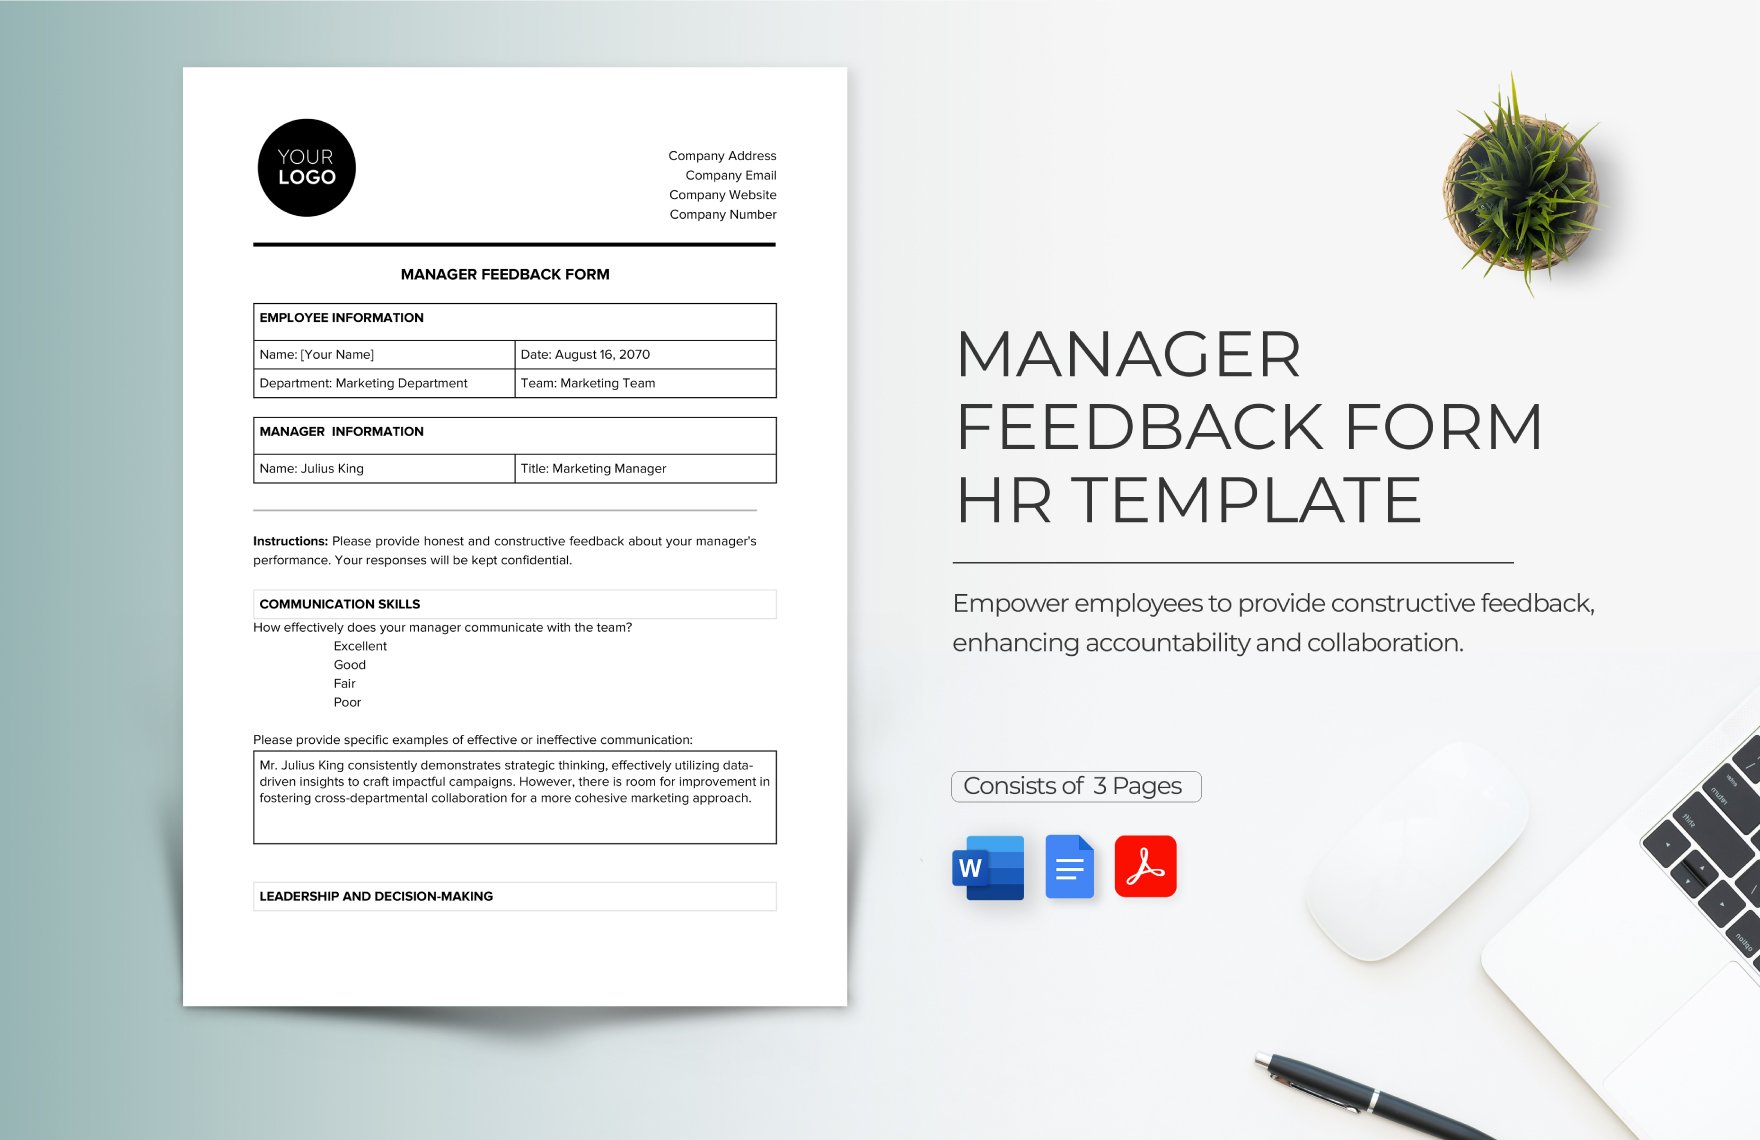 Manager Feedback Form HR Template